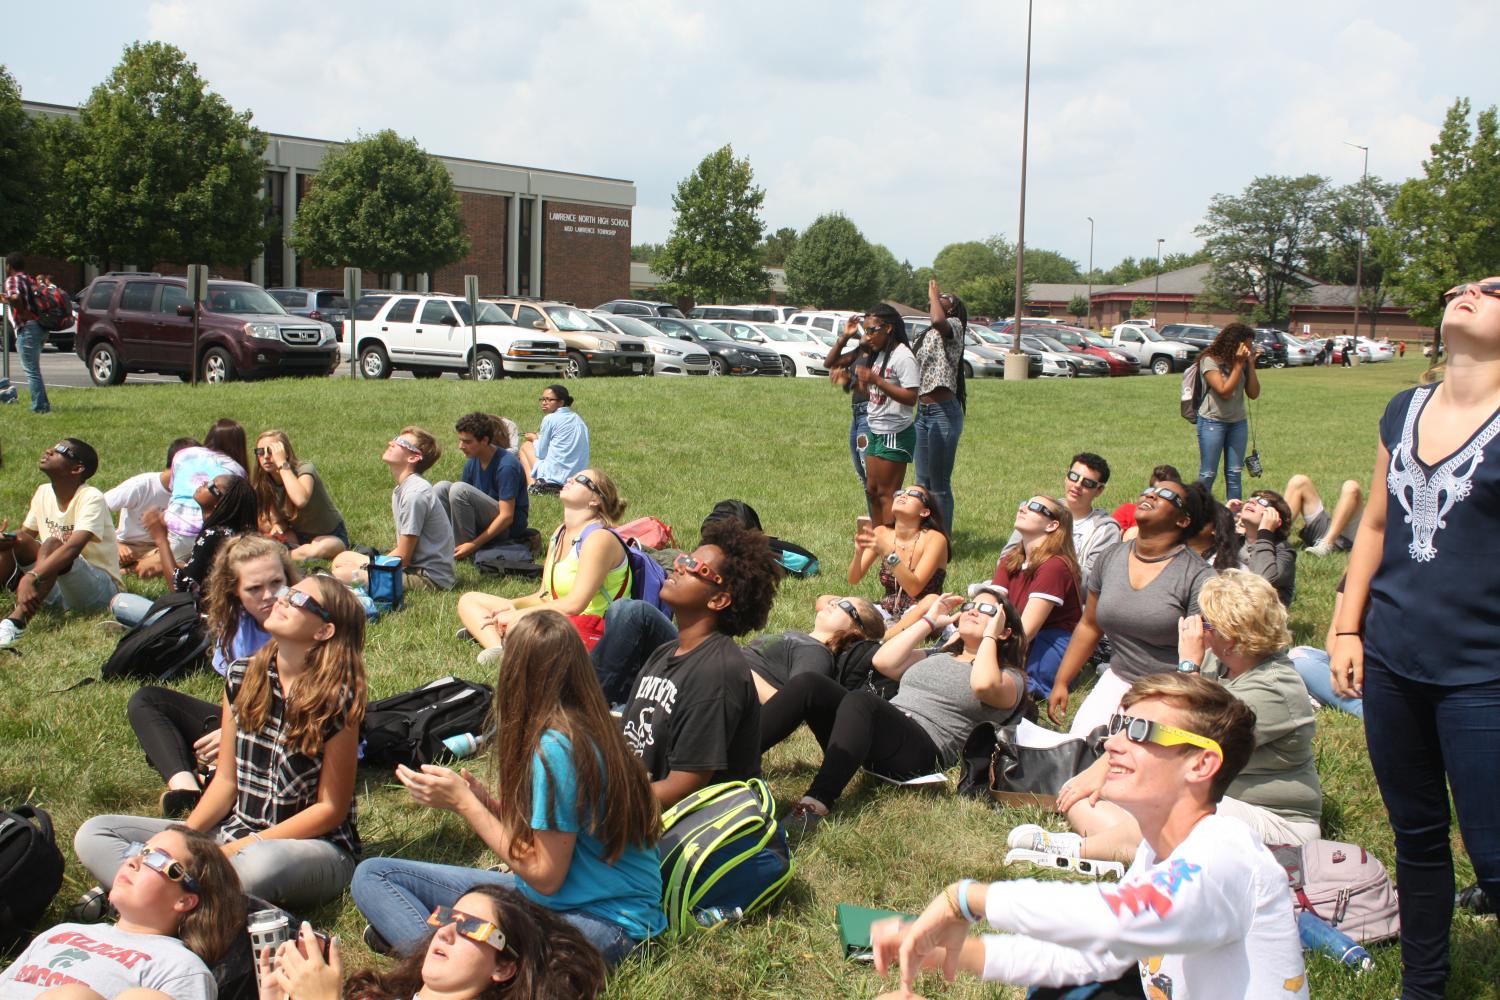 Students+get+chance+to+experience+first+full+solar+eclipse+since+1979